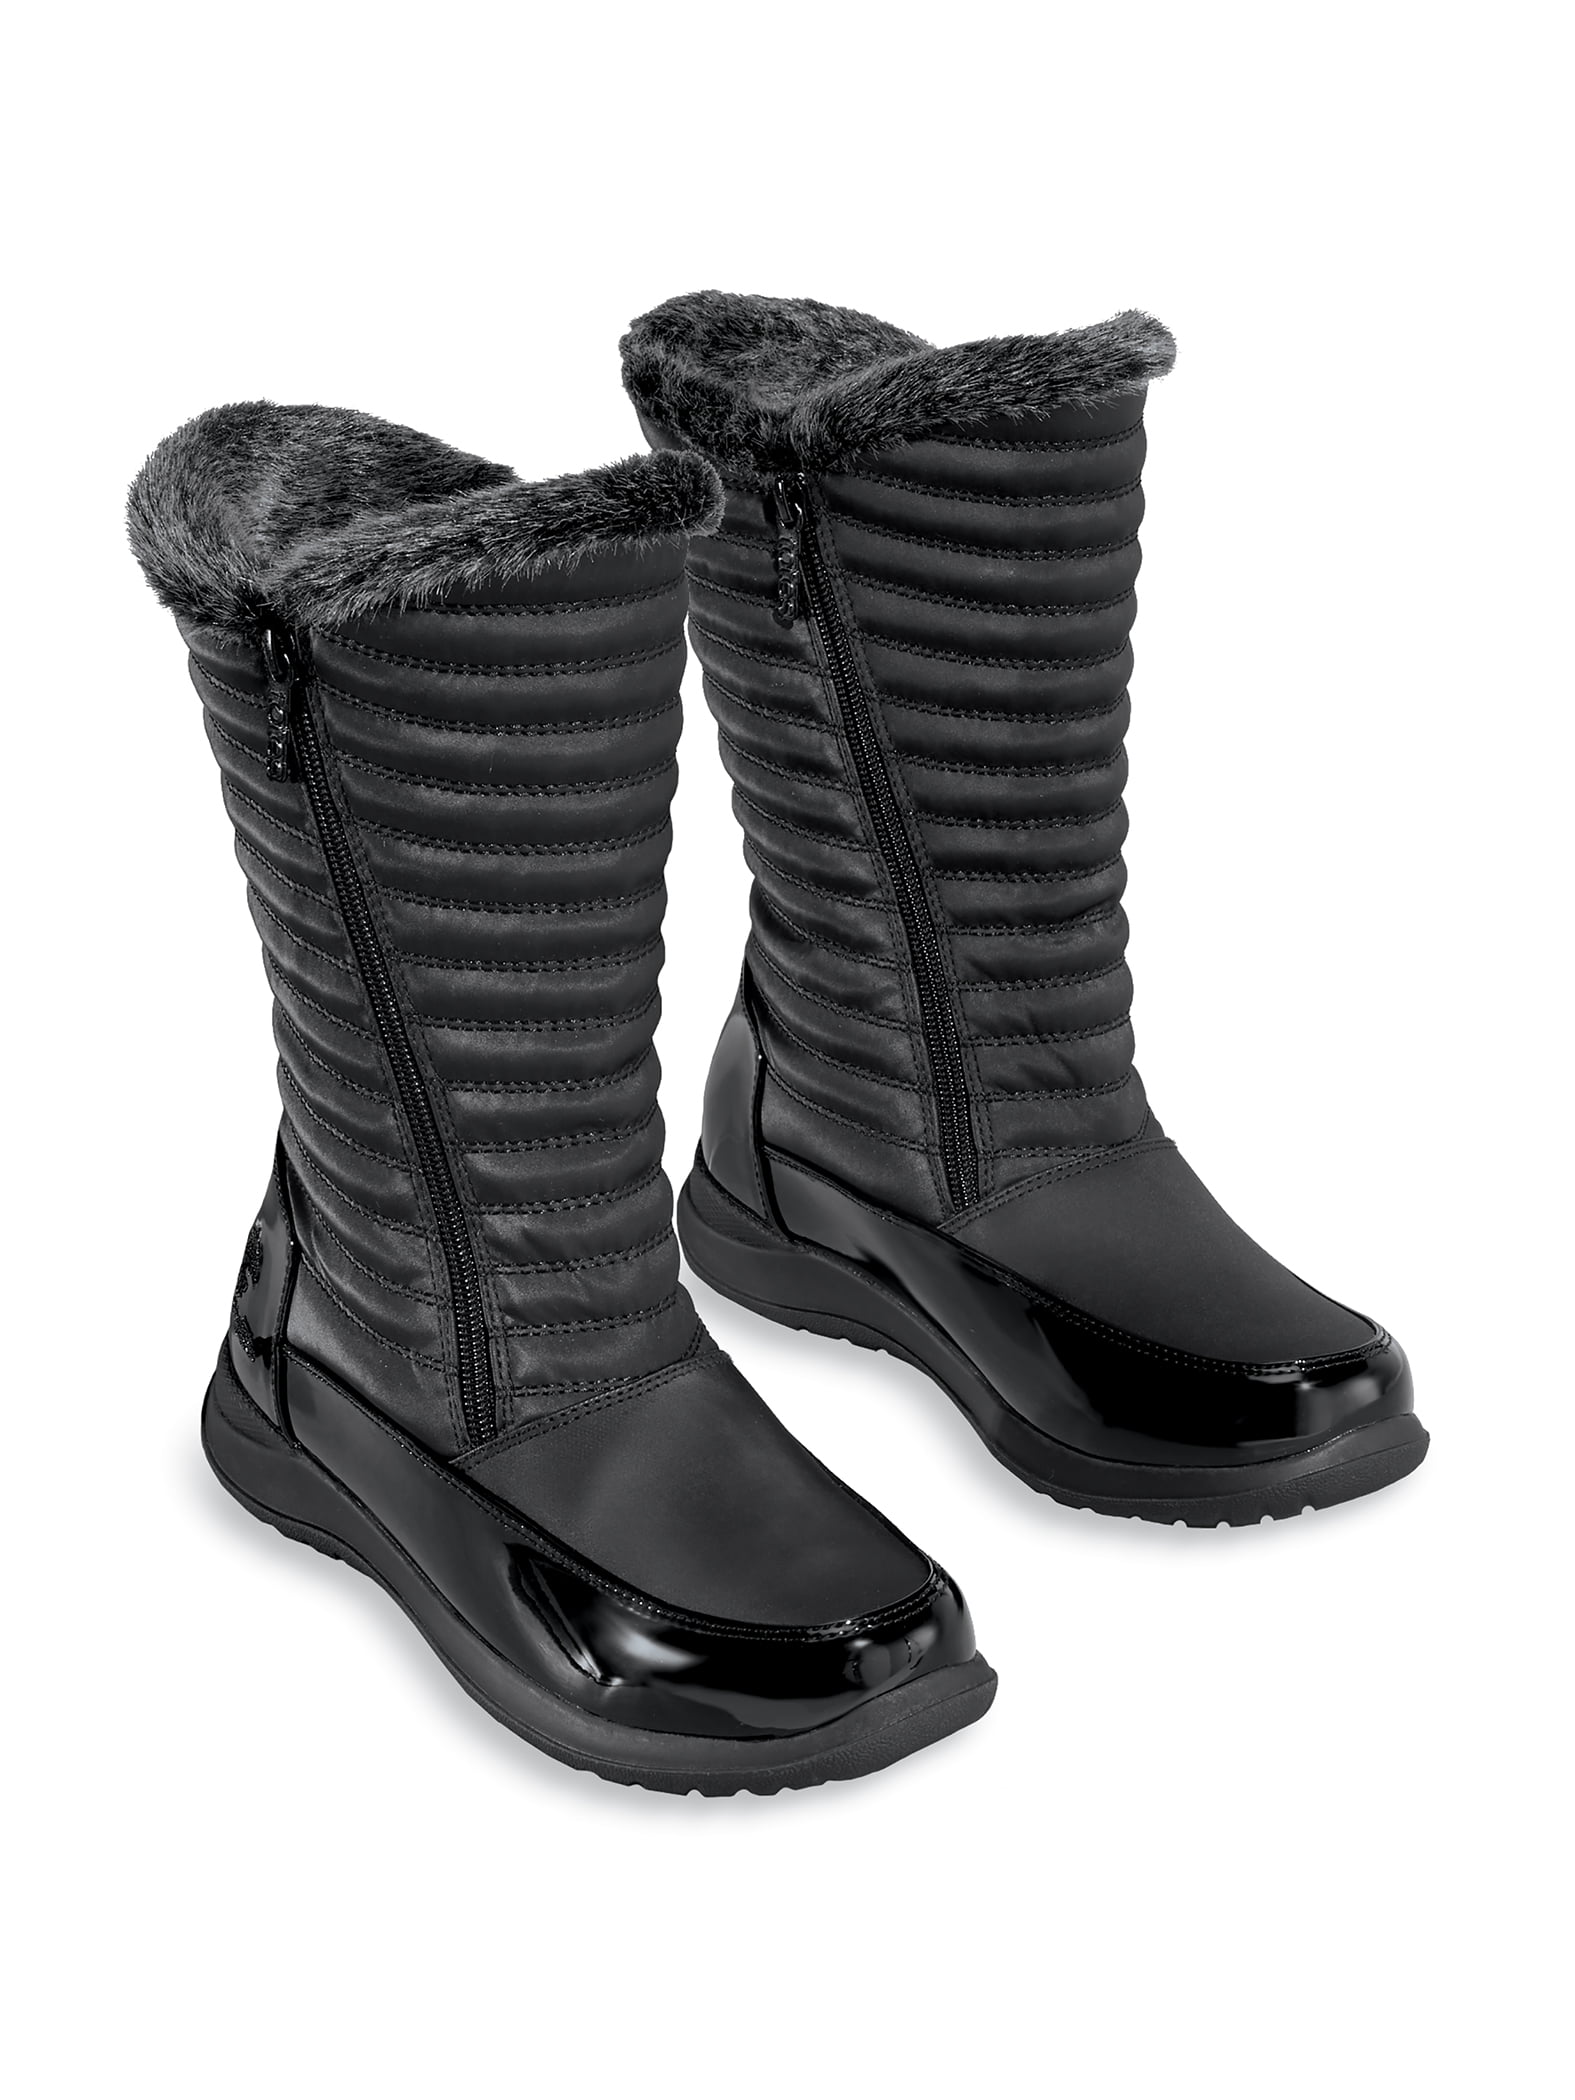 Details about   The Alexus Lady's Dual Zipper Easy On/Off Snow Boots Black Size 10 